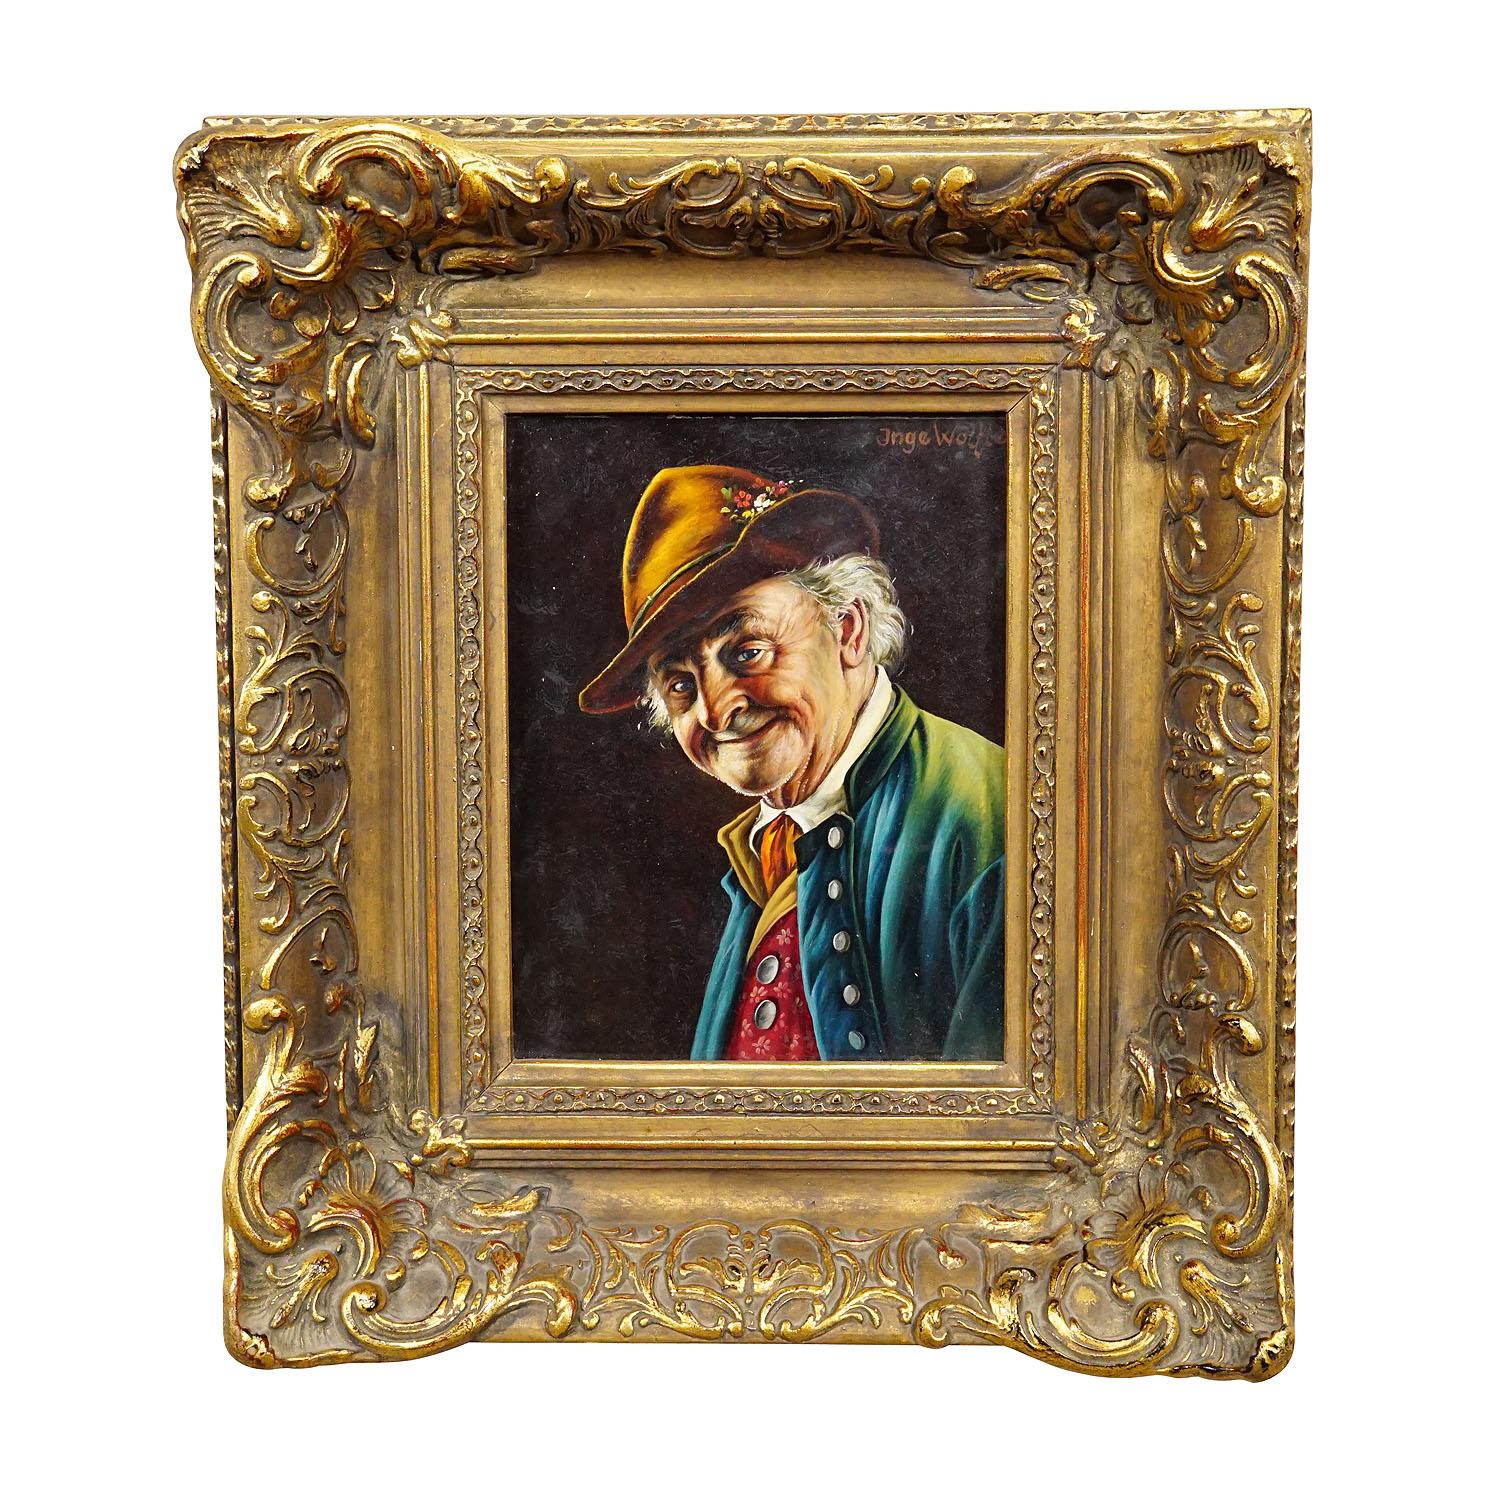 Inge Woelfle - Portrait of a Bavarian Folksy Man, Oil on Wood

An colorful oil painting depicting a folksy Bavarian man in his sunday robe. Painted on wood with pastel colors around 1950s. Framed with wooden carved and gilded frame in Baroque style.